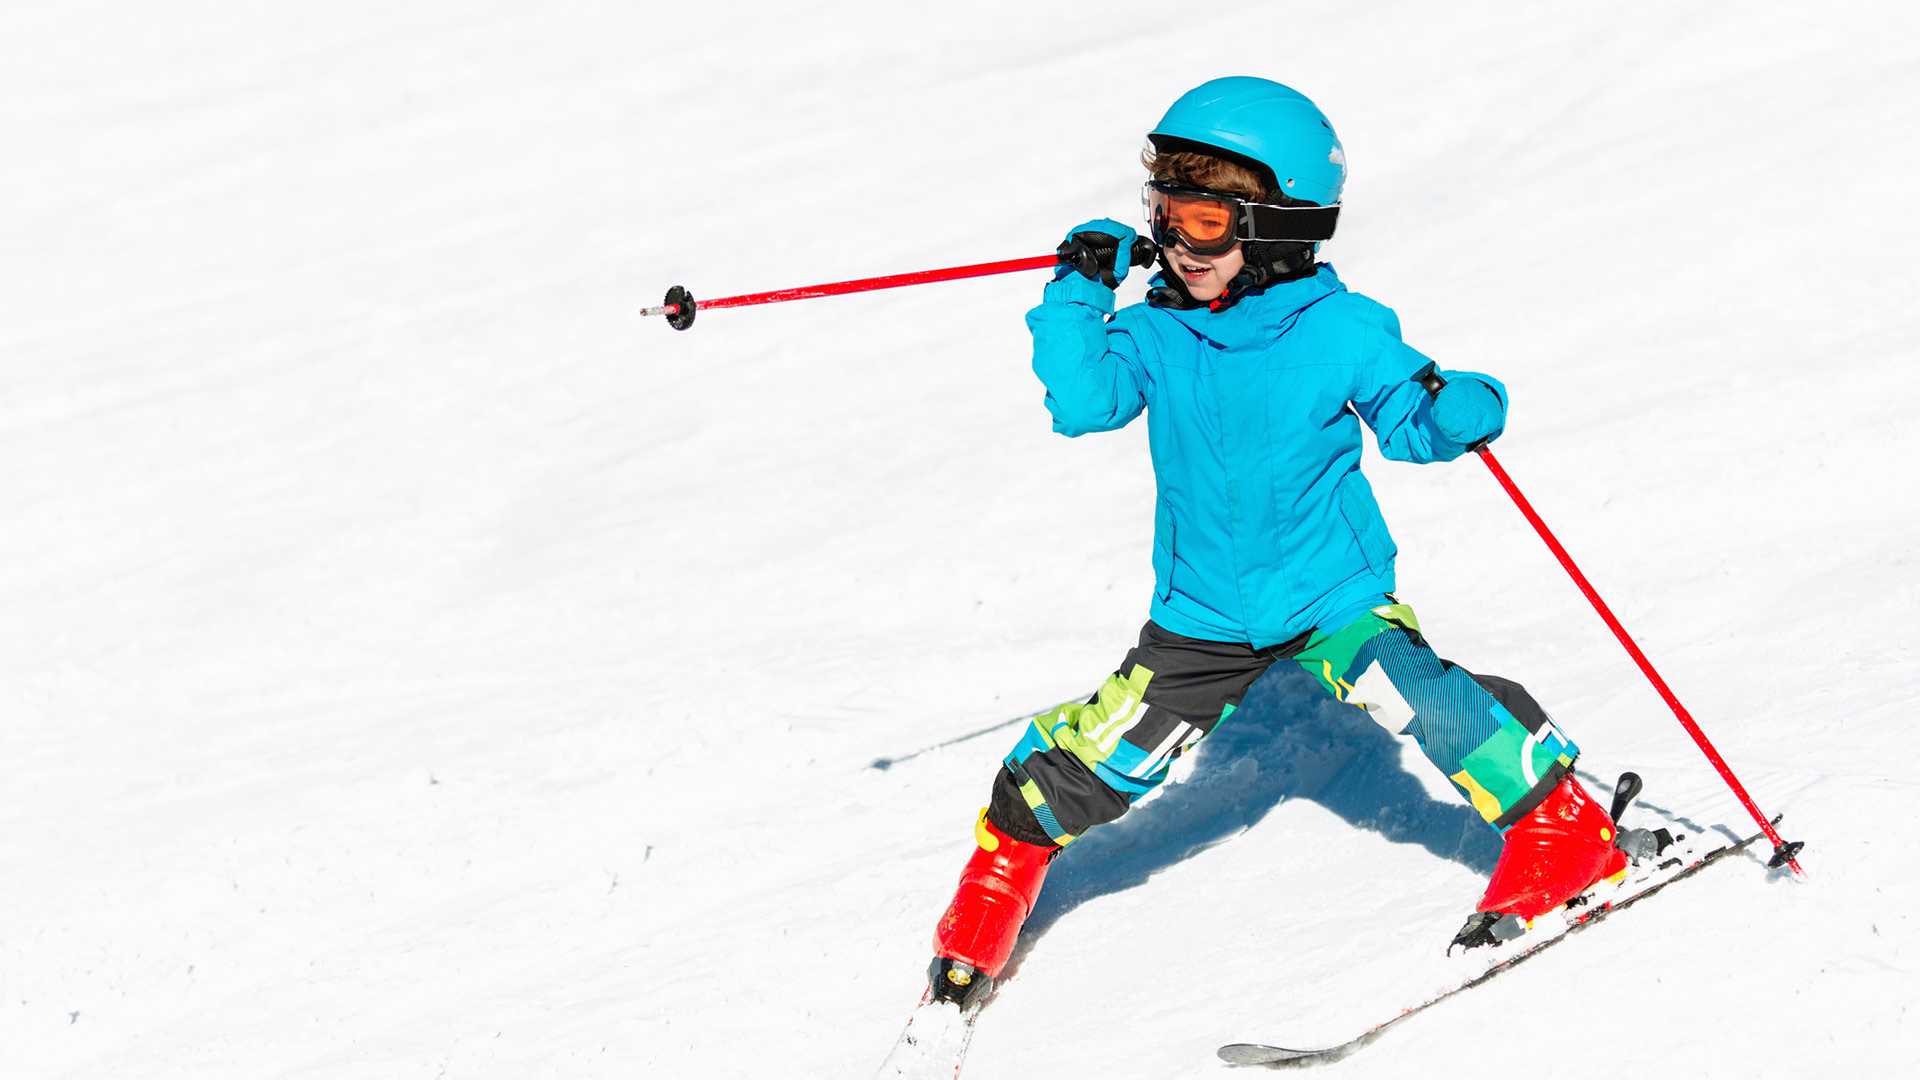 A young child skiing in a striking blue ski suit. 